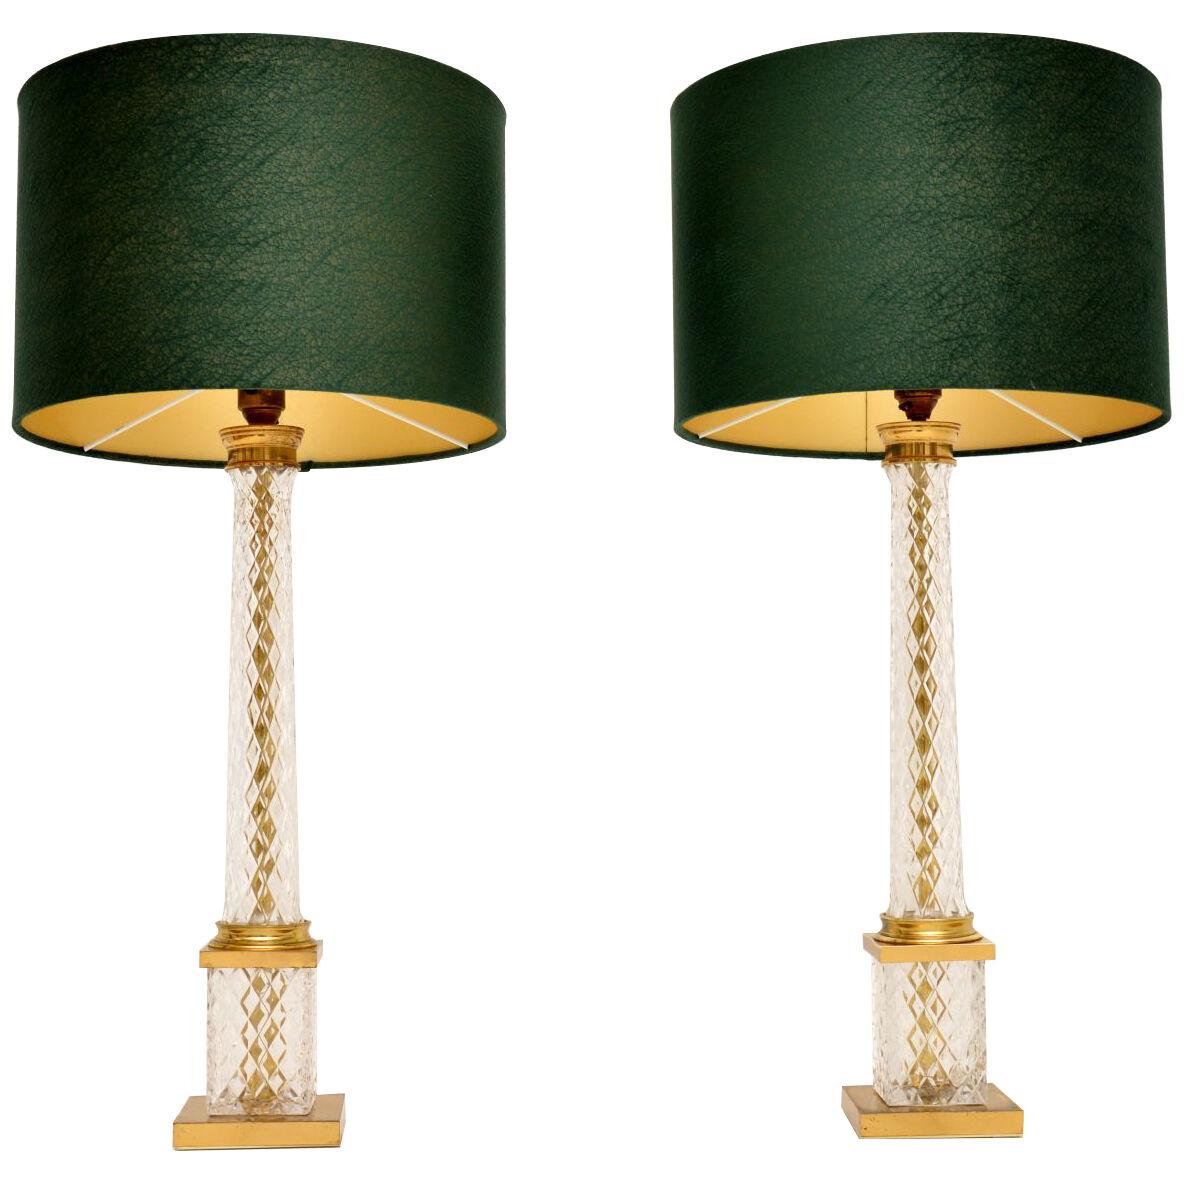 Pair of Vintage French Crystal Glass & Brass Table Lamps